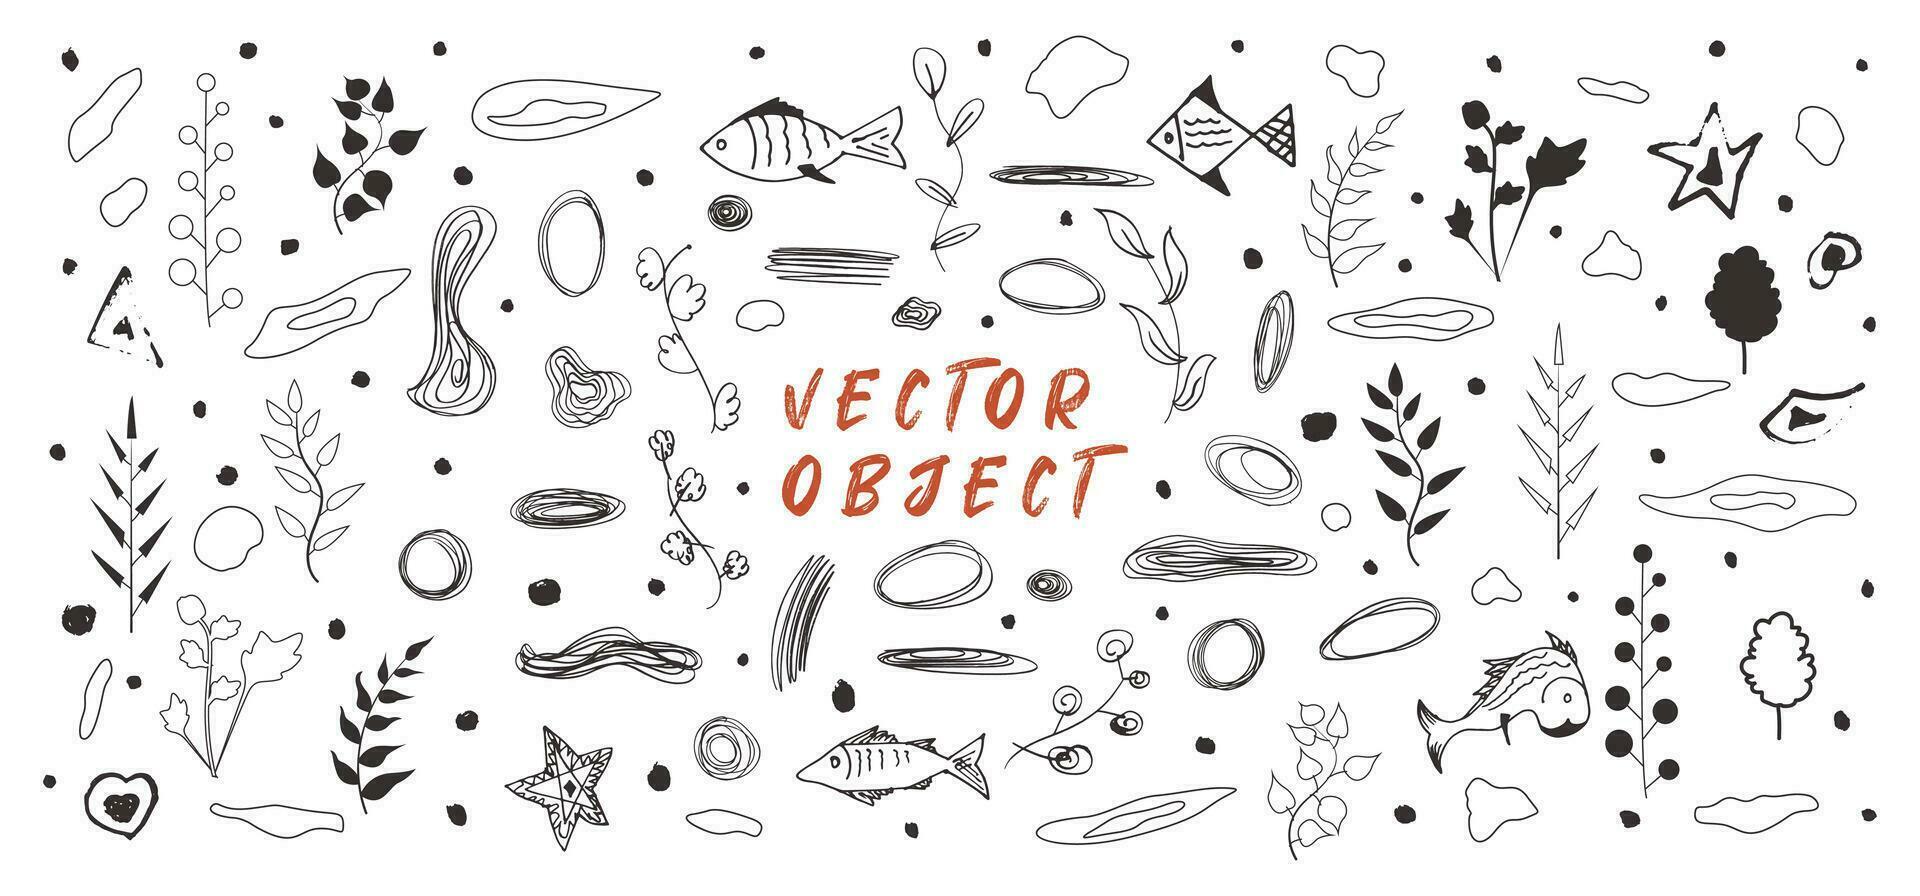 Handmade products. Completely vector and different. This elements that can be used to create any design. Vector brush type object.